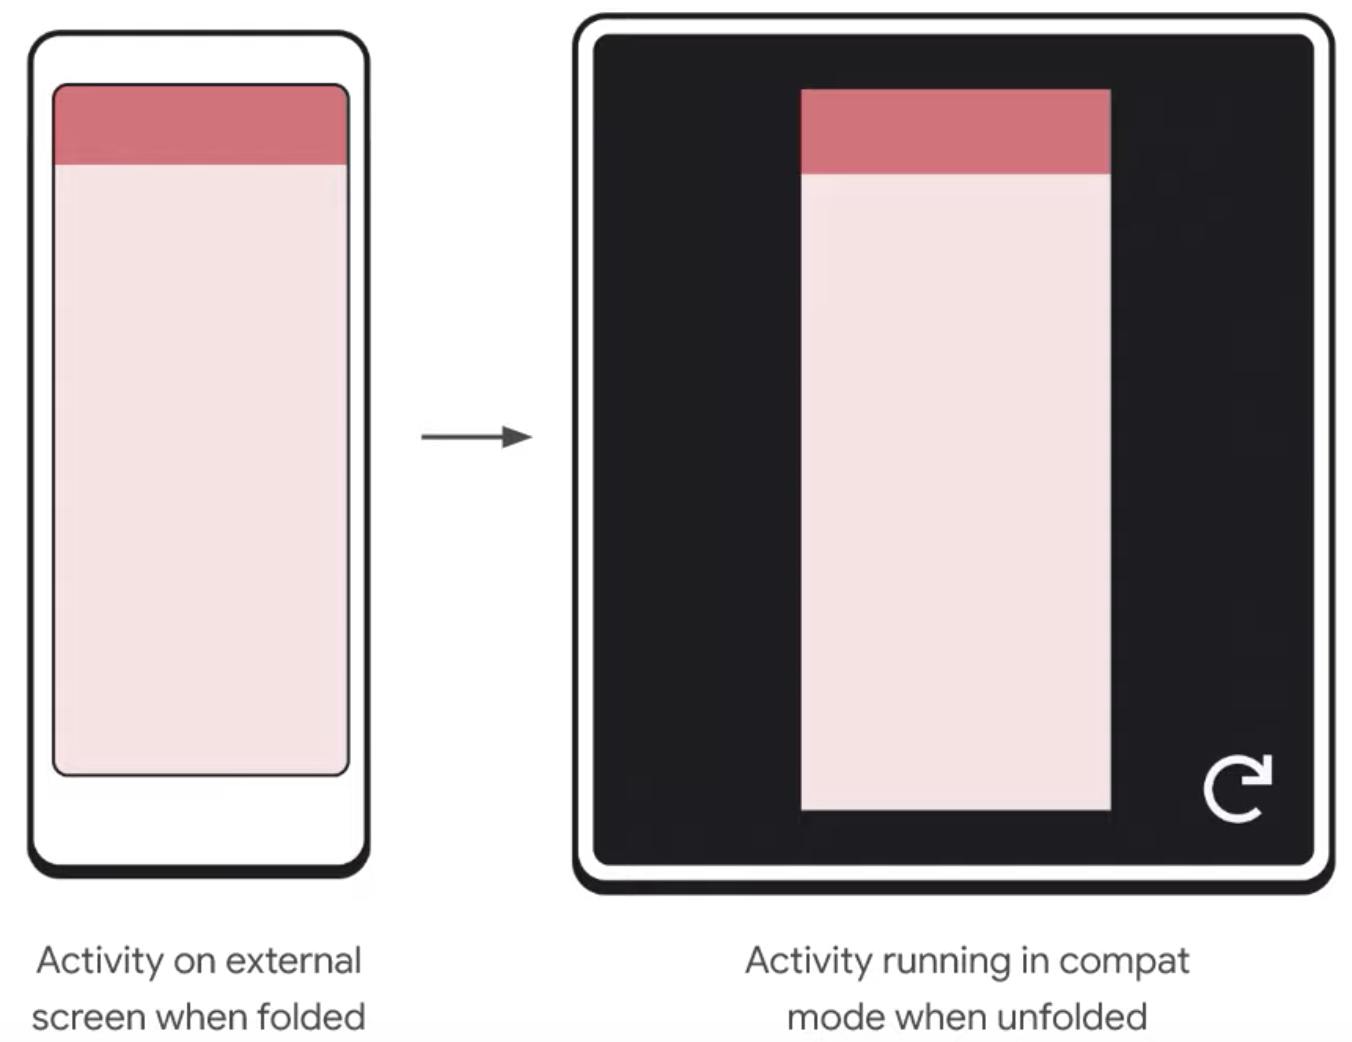 Activity running in compat mode on foldable device when unfolded